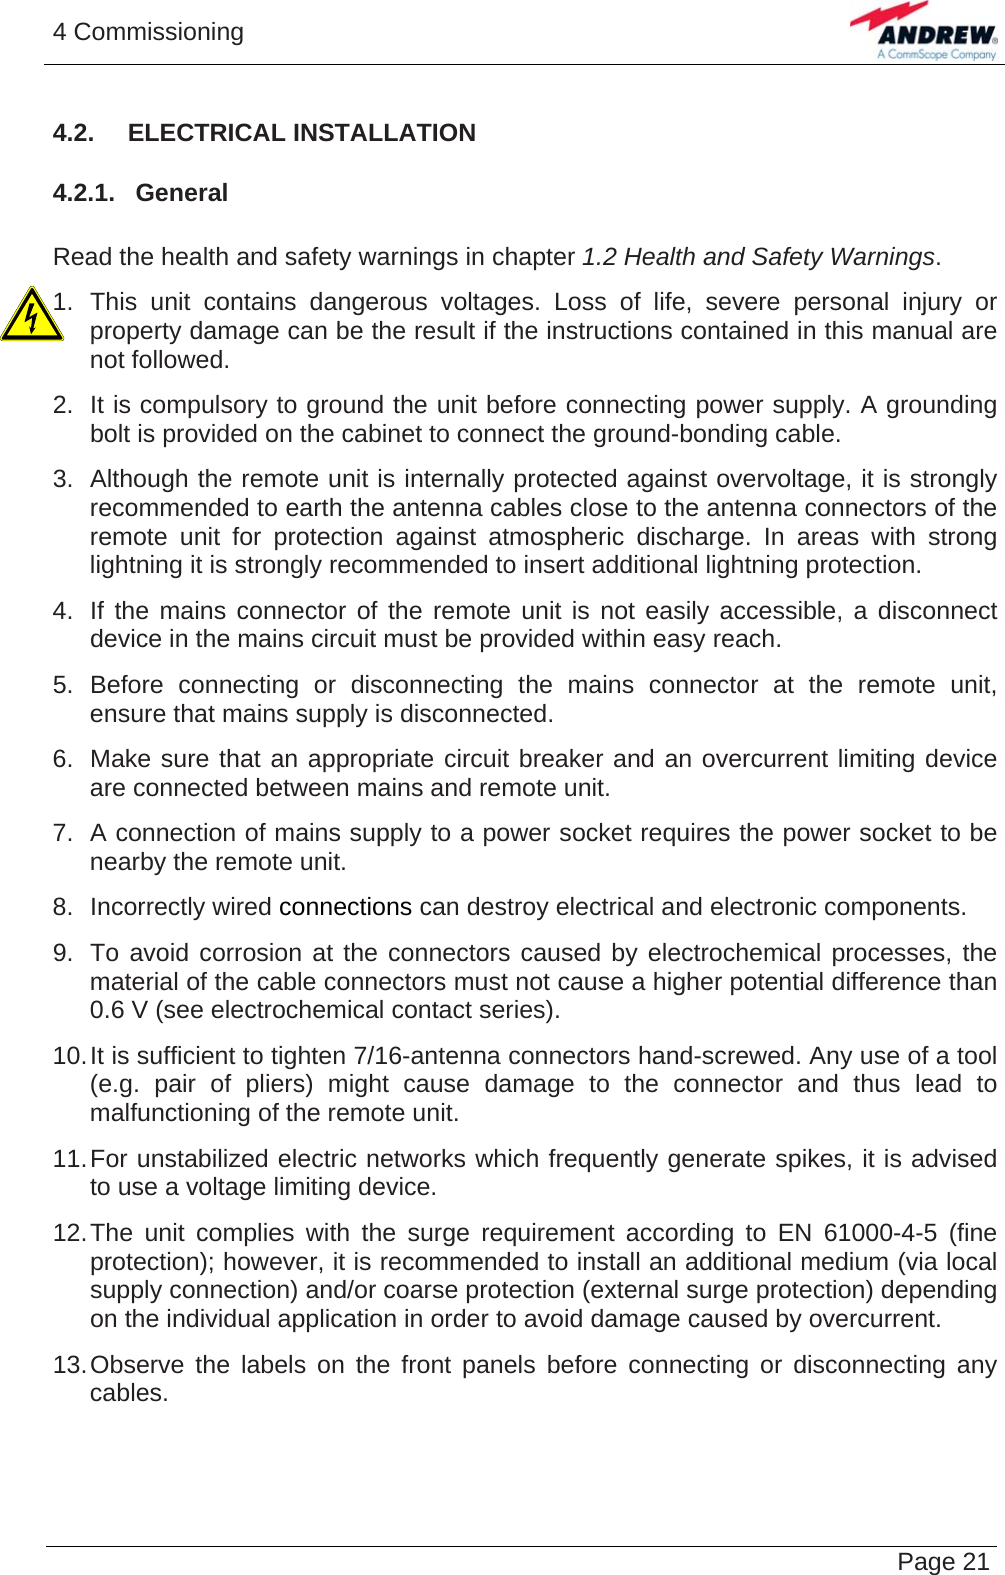 4 Commissioning   Page 214.2.  ELECTRICAL INSTALLATION 4.2.1.  General  Read the health and safety warnings in chapter 1.2 Health and Safety Warnings. 1. This unit contains dangerous voltages. Loss of life, severe personal injury or property damage can be the result if the instructions contained in this manual are not followed. 2.  It is compulsory to ground the unit before connecting power supply. A grounding bolt is provided on the cabinet to connect the ground-bonding cable. 3.  Although the remote unit is internally protected against overvoltage, it is strongly recommended to earth the antenna cables close to the antenna connectors of the remote unit for protection against atmospheric discharge. In areas with strong lightning it is strongly recommended to insert additional lightning protection. 4.  If the mains connector of the remote unit is not easily accessible, a disconnect device in the mains circuit must be provided within easy reach. 5. Before connecting or disconnecting the mains connector at the remote unit, ensure that mains supply is disconnected. 6.  Make sure that an appropriate circuit breaker and an overcurrent limiting device are connected between mains and remote unit. 7.  A connection of mains supply to a power socket requires the power socket to be nearby the remote unit. 8. Incorrectly wired connections can destroy electrical and electronic components. 9.  To avoid corrosion at the connectors caused by electrochemical processes, the material of the cable connectors must not cause a higher potential difference than 0.6 V (see electrochemical contact series). 10. It is sufficient to tighten 7/16-antenna connectors hand-screwed. Any use of a tool (e.g. pair of pliers) might cause damage to the connector and thus lead to malfunctioning of the remote unit. 11. For unstabilized electric networks which frequently generate spikes, it is advised to use a voltage limiting device.  12. The unit complies with the surge requirement according to EN 61000-4-5 (fine protection); however, it is recommended to install an additional medium (via local supply connection) and/or coarse protection (external surge protection) depending on the individual application in order to avoid damage caused by overcurrent. 13. Observe the labels on the front panels before connecting or disconnecting any cables.   